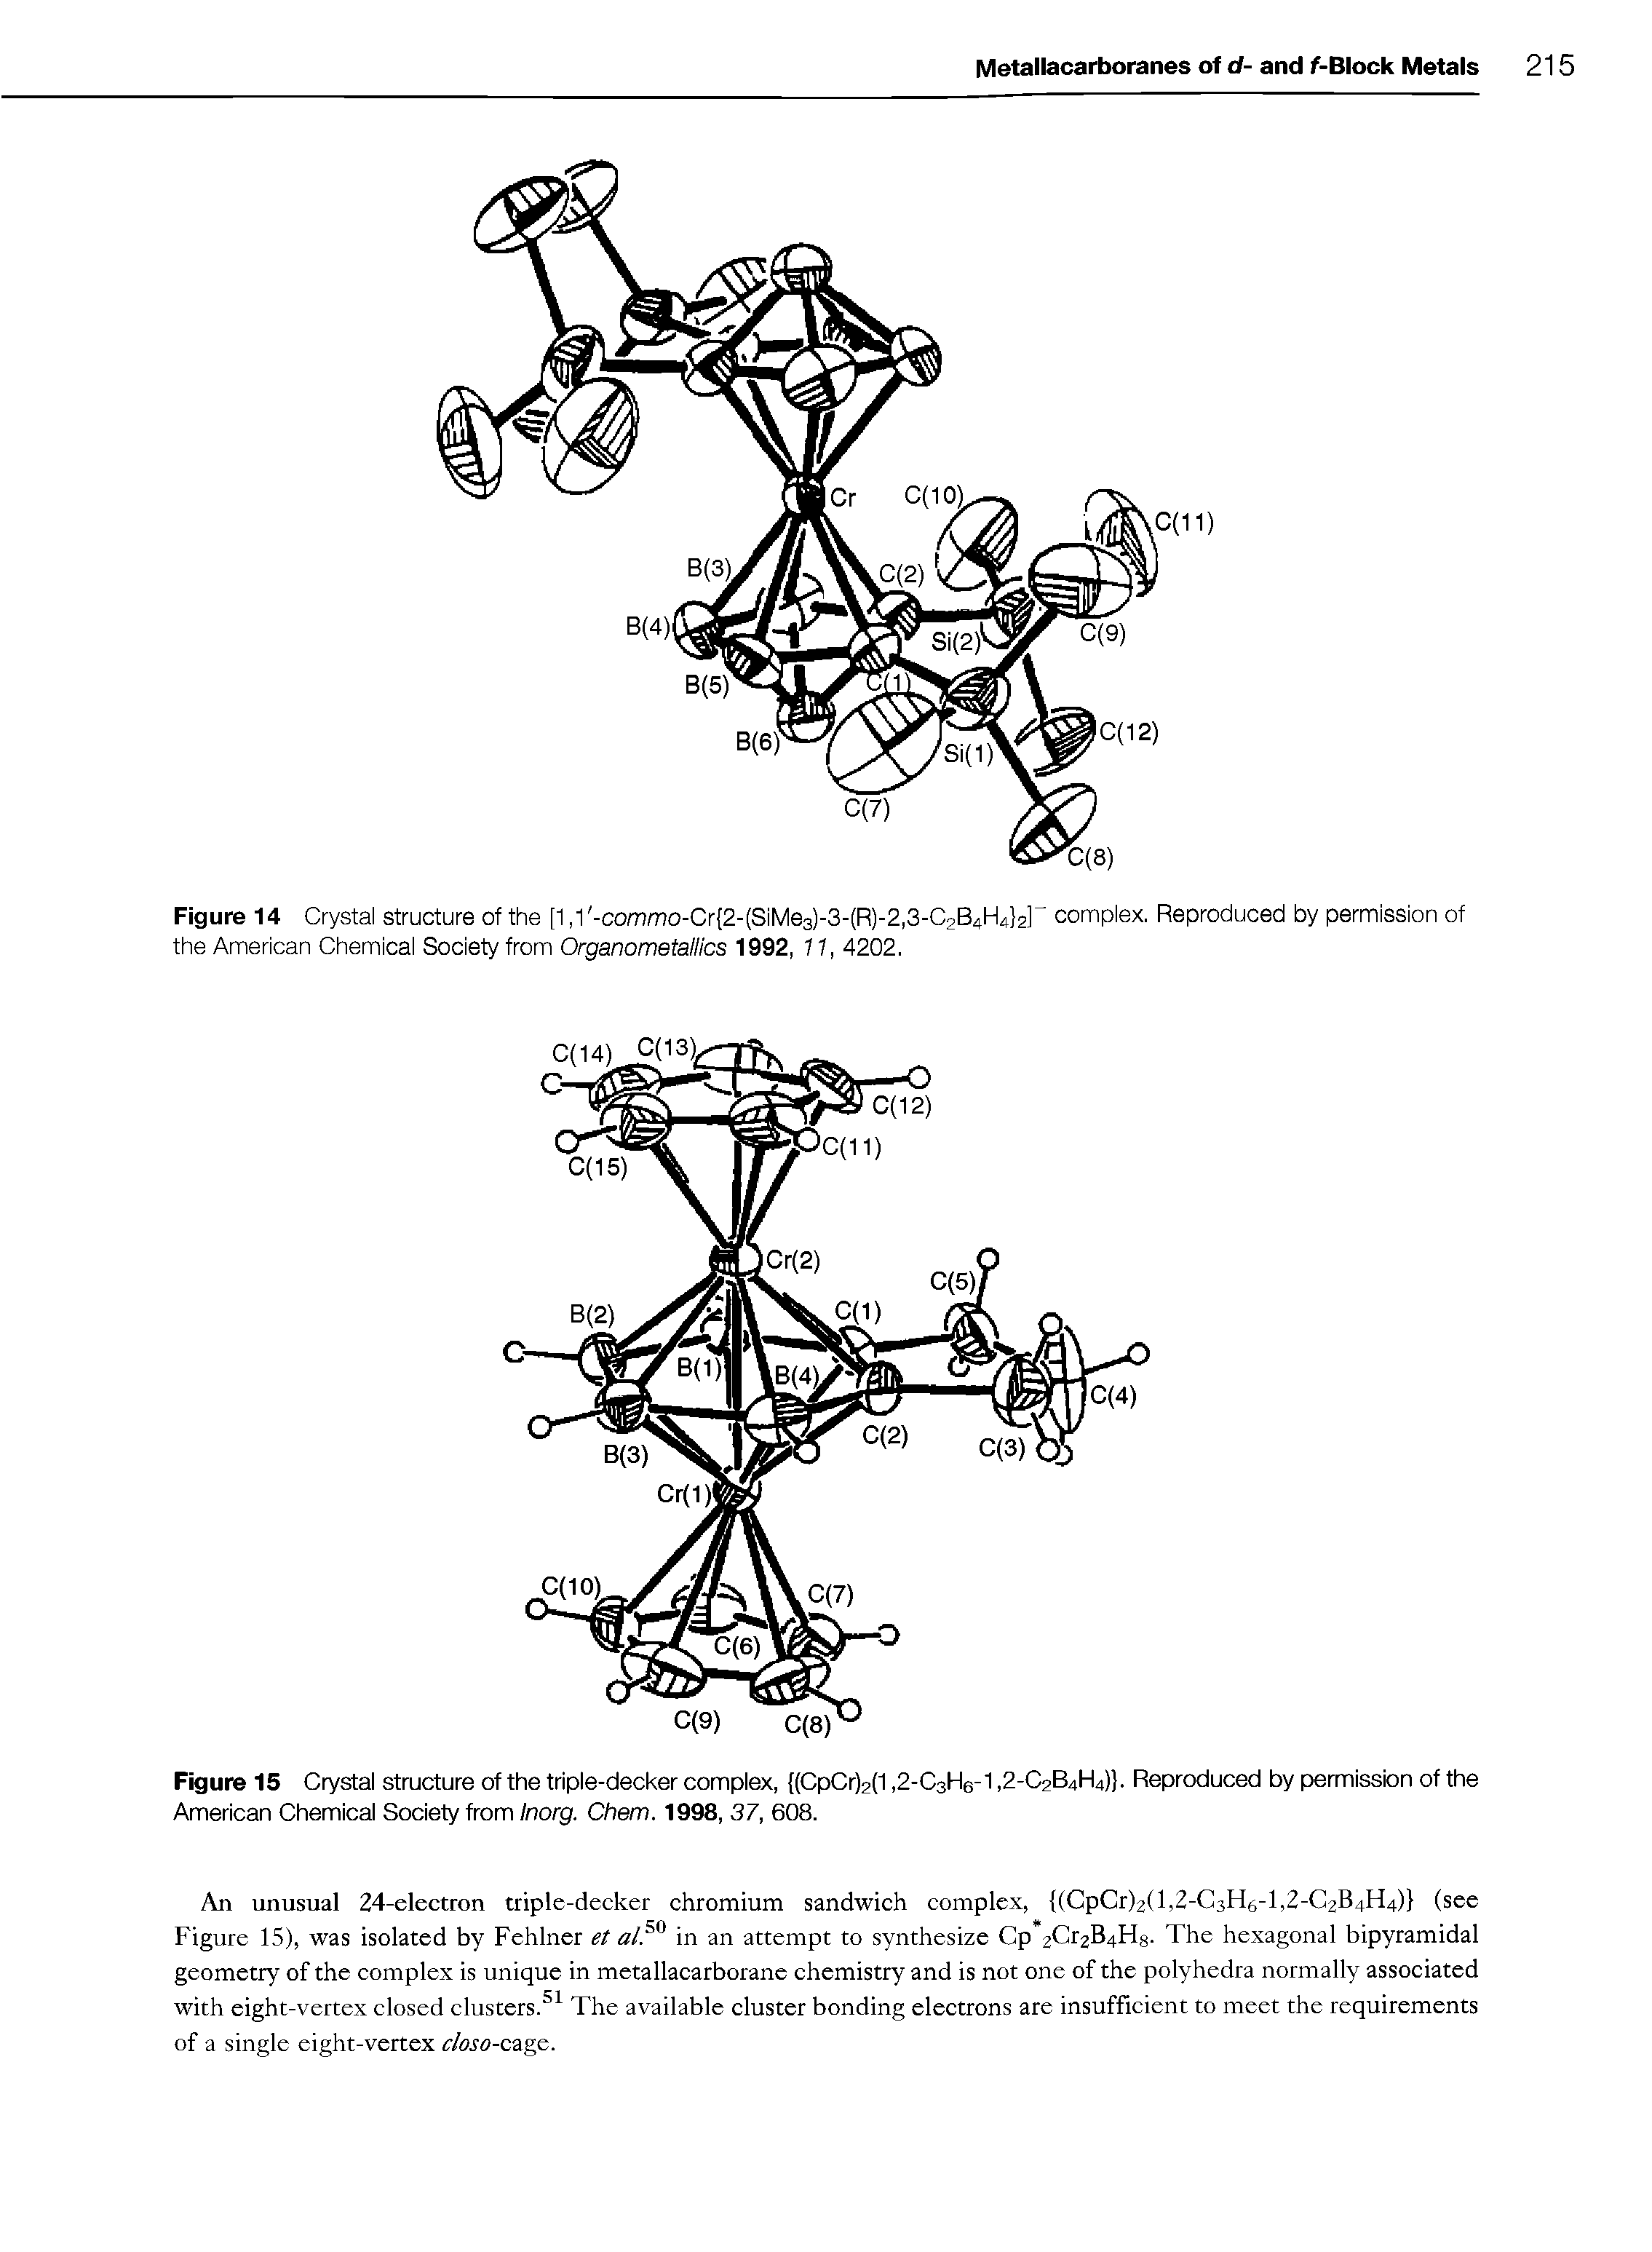 Figure 15 Crystal structure of the triple-decker complex, (CpCr)2(1,2-C3H6-1,2-C2B4H4). Reproduced by permission of the American Chemical Society from Inorg. Chem. 1998, 37, 608.